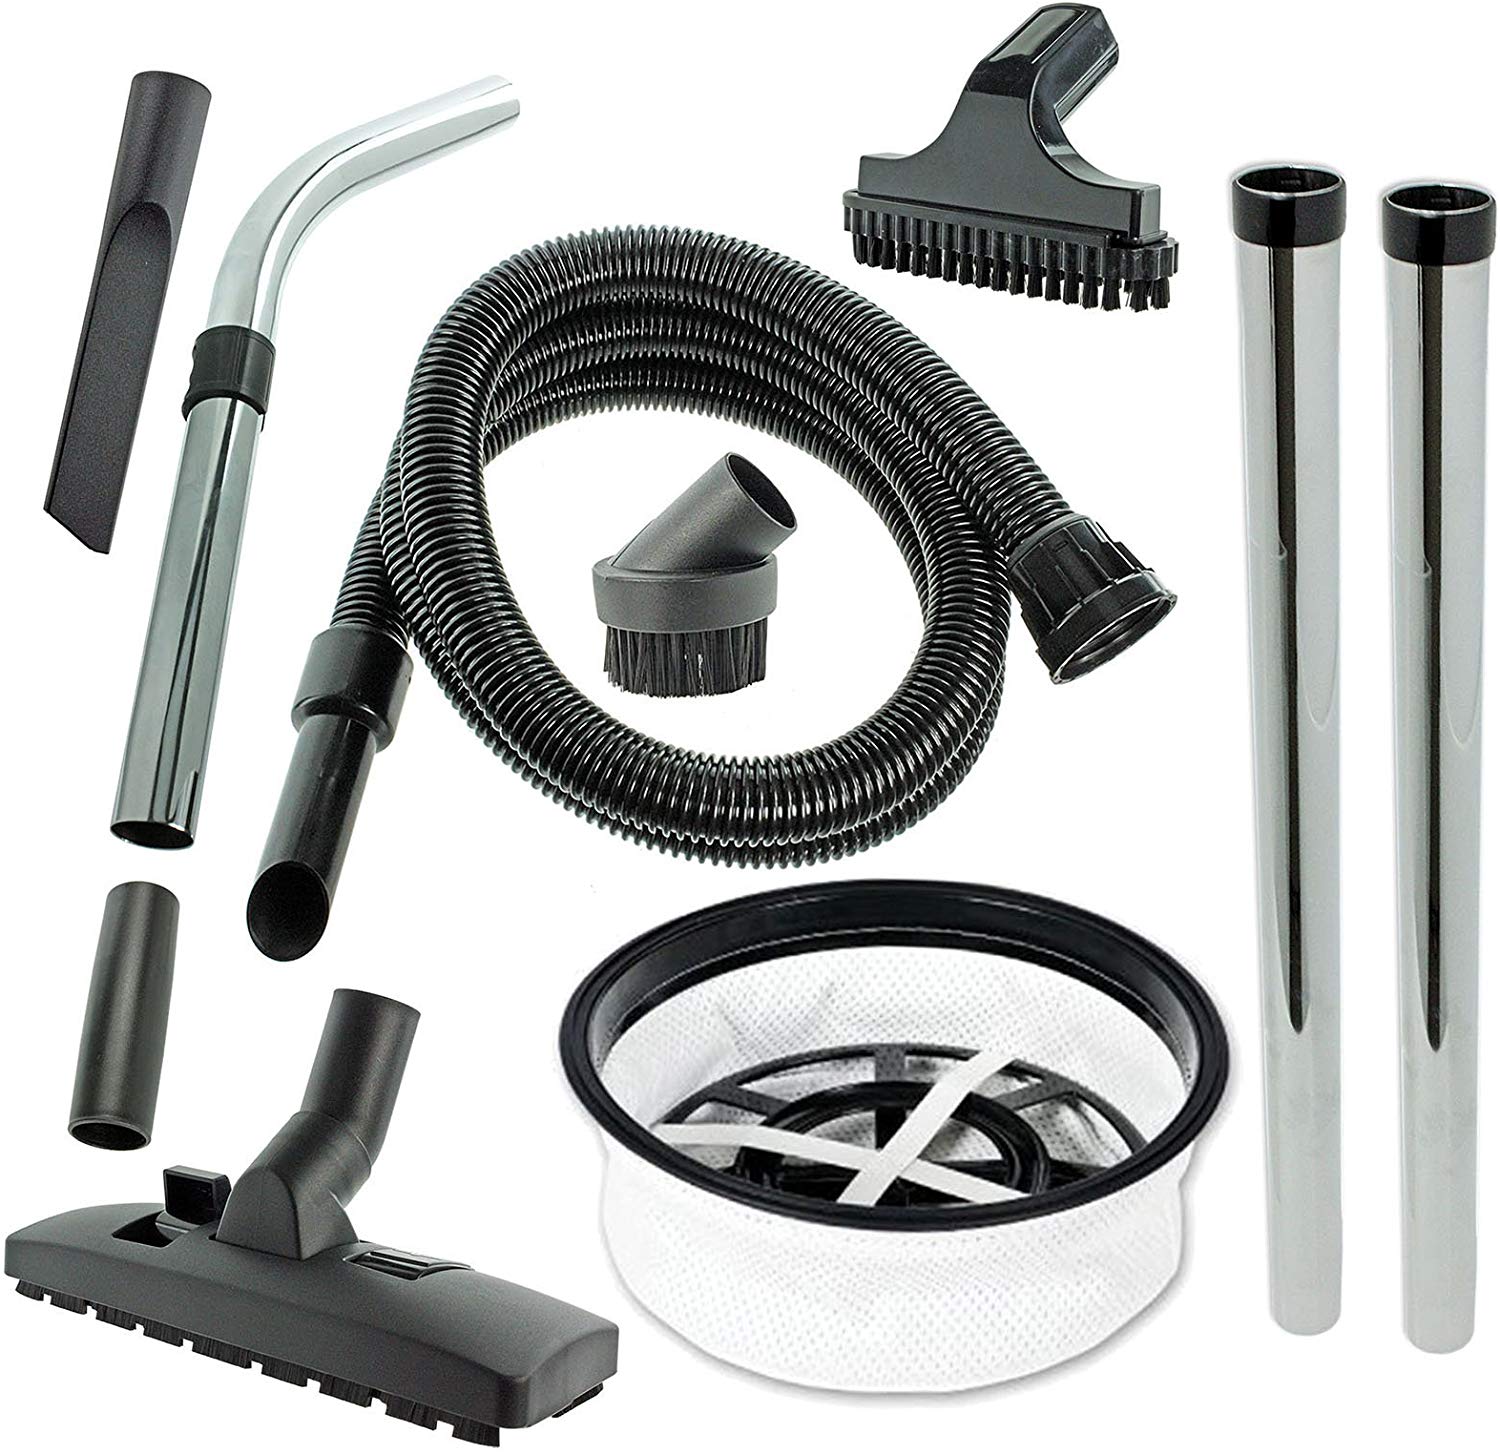 SPARES2GO Hose Filter & Spare Parts Tools Kit for Numatic George GVE370 GVE370-2 Vacuum Cleaner Hoover (2.5m)